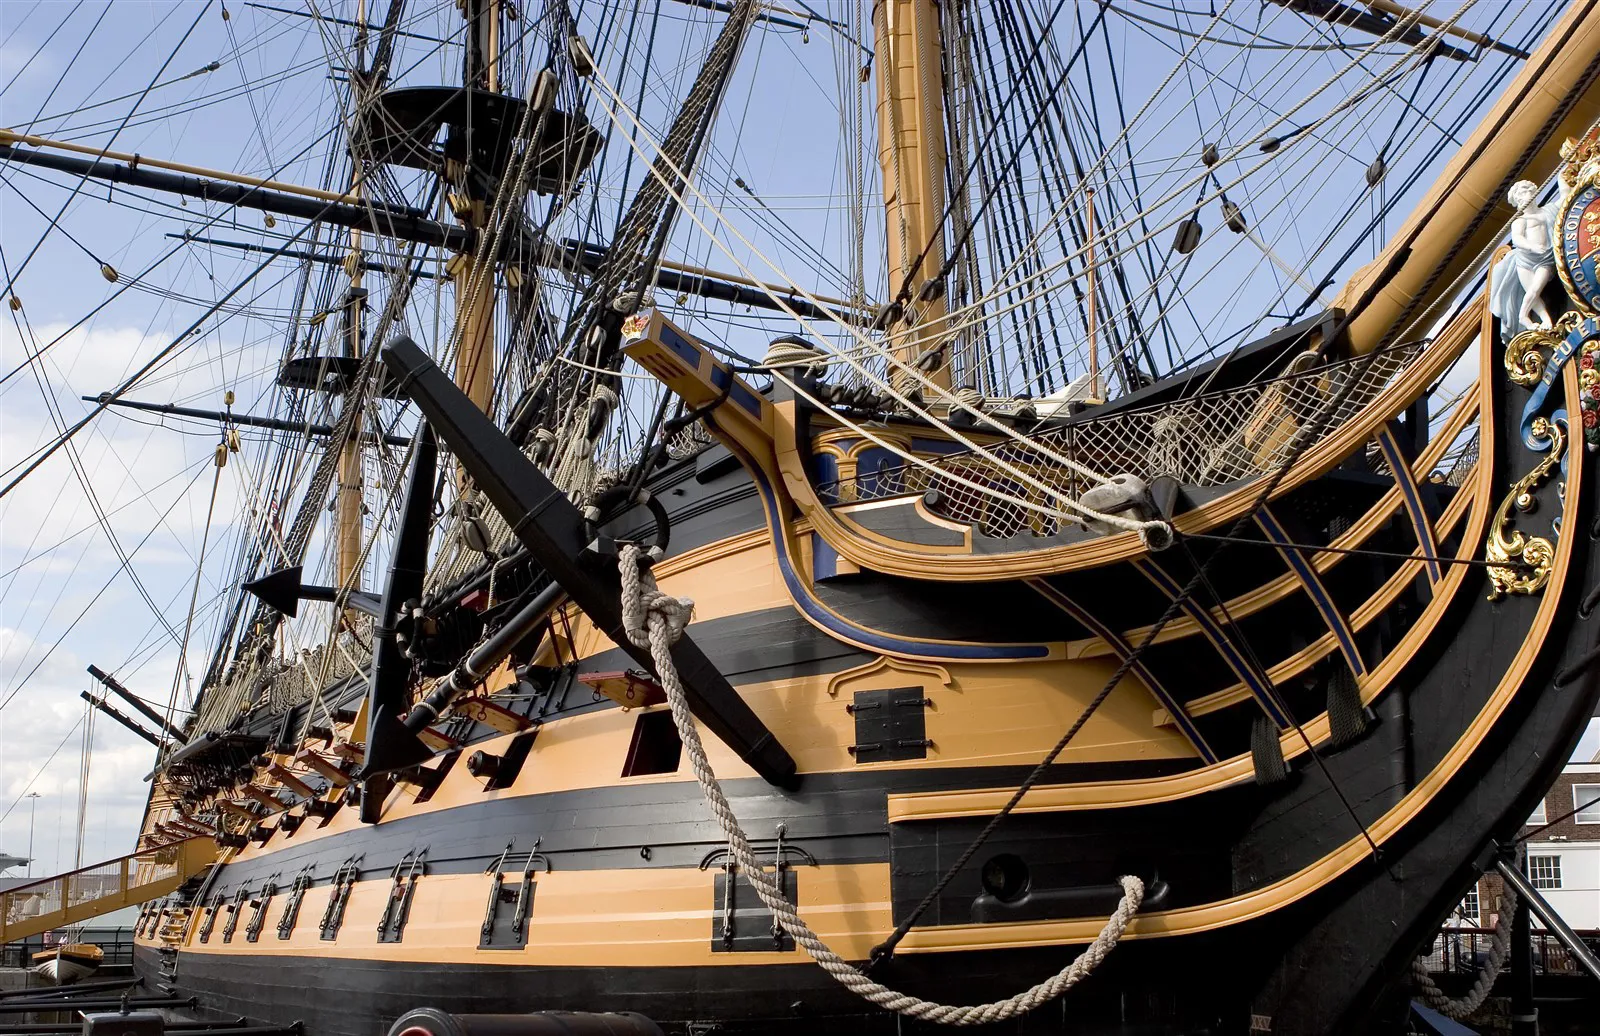 HMS Victory in the Portsmouth Historic Dockyard